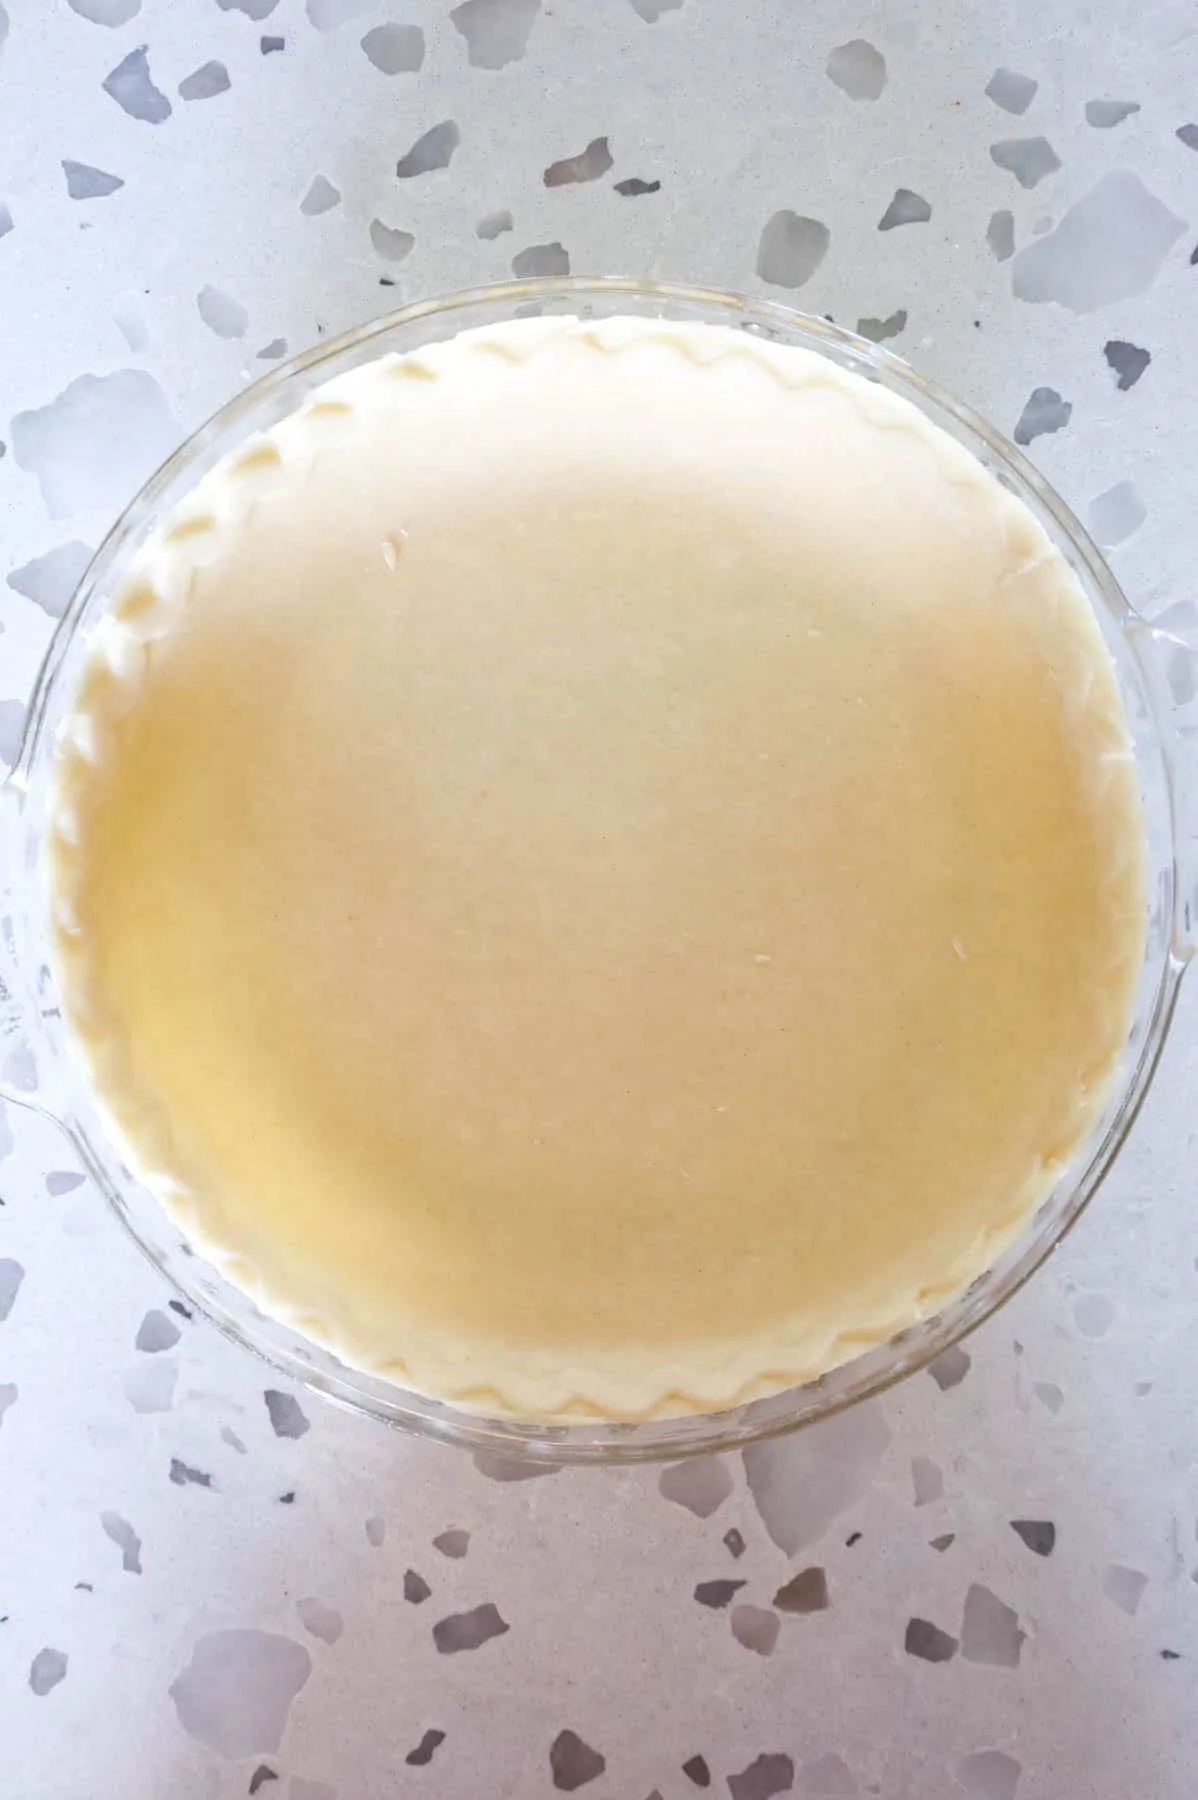 unbaked pie shell in a glass pie plate